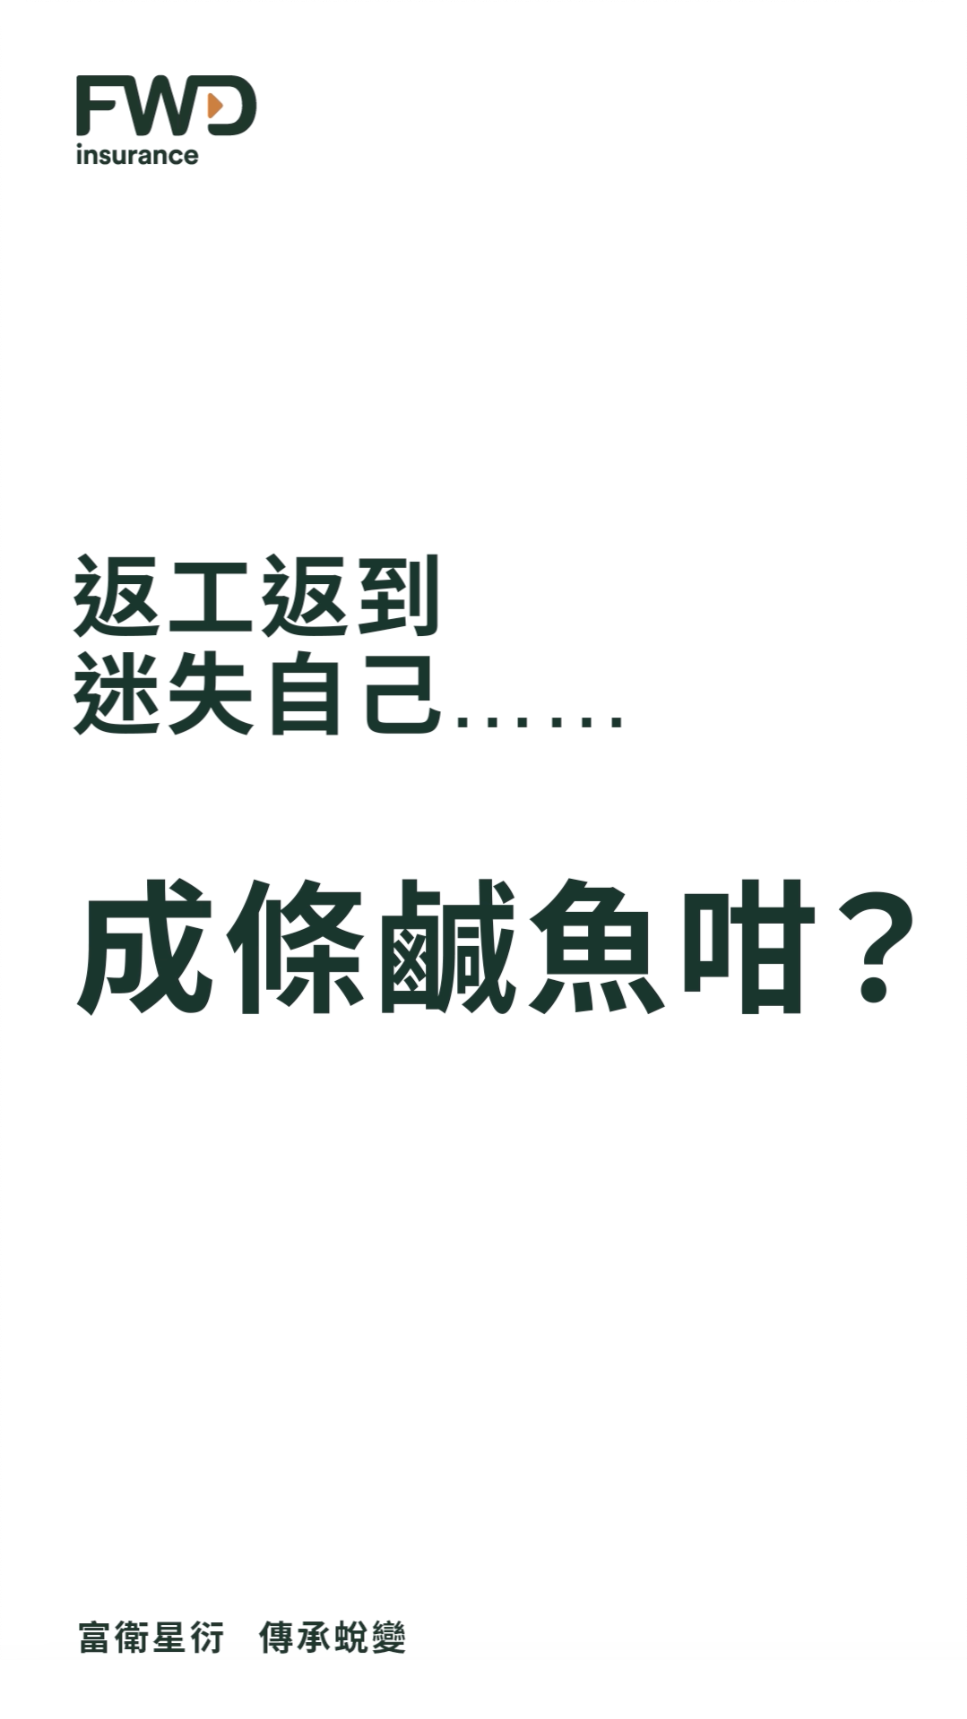 question1.png